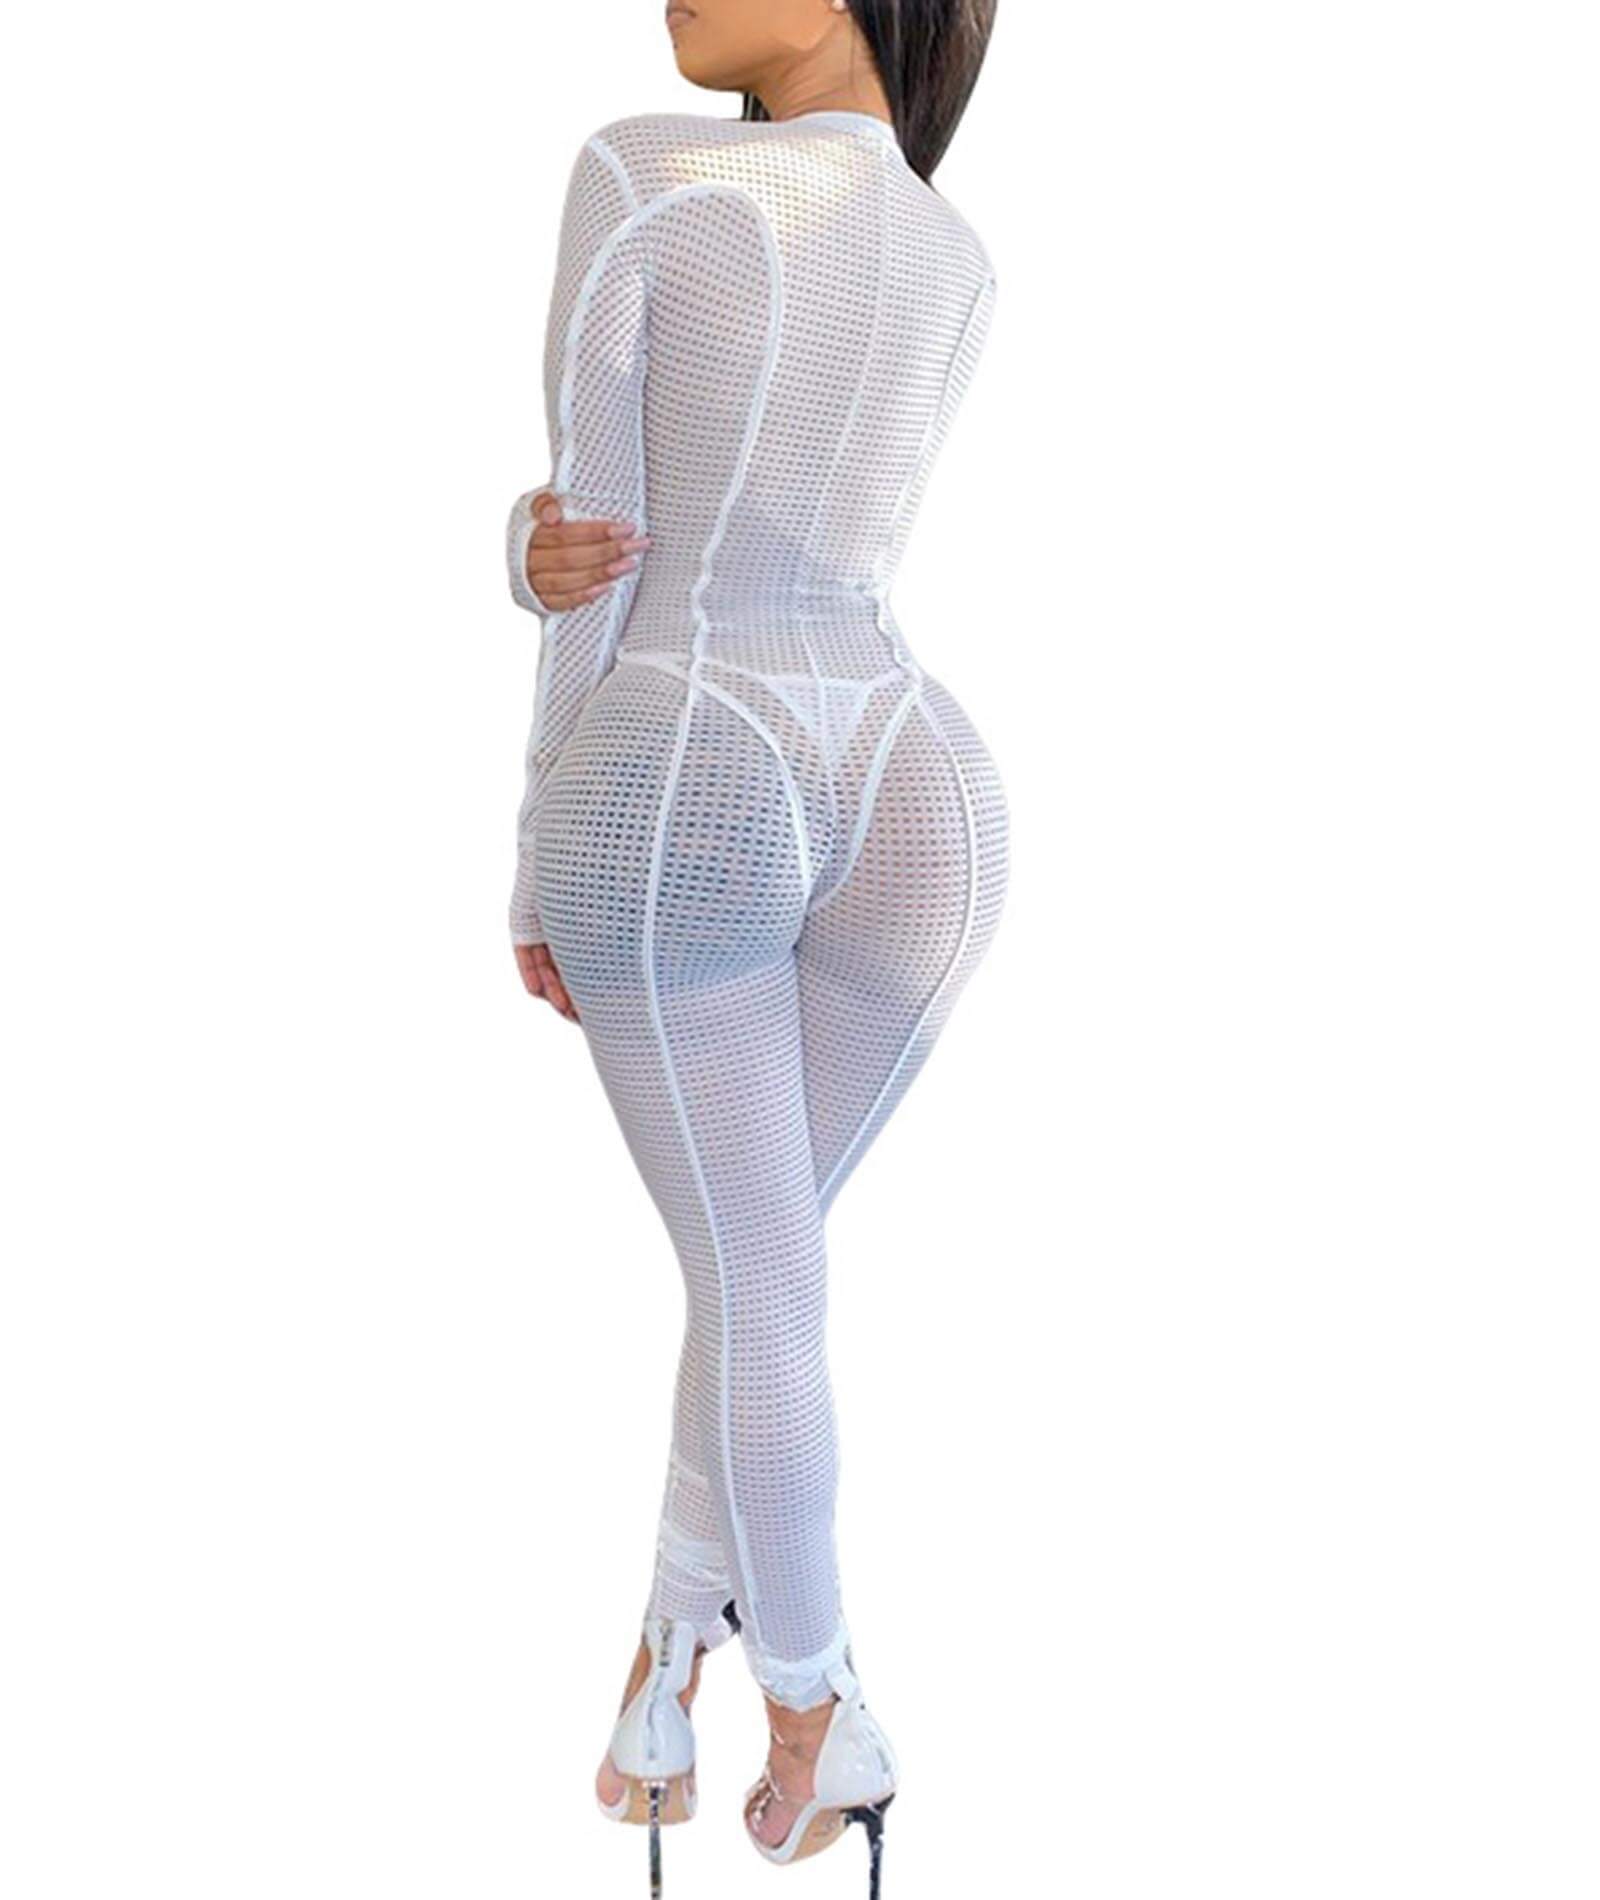 NZGSTR One Piece Outfits for Women Zip Up Bodycon Jumpsuit Long Sleeve Bodysuit Sheer Mesh Skinny Pants See Through Clubwear